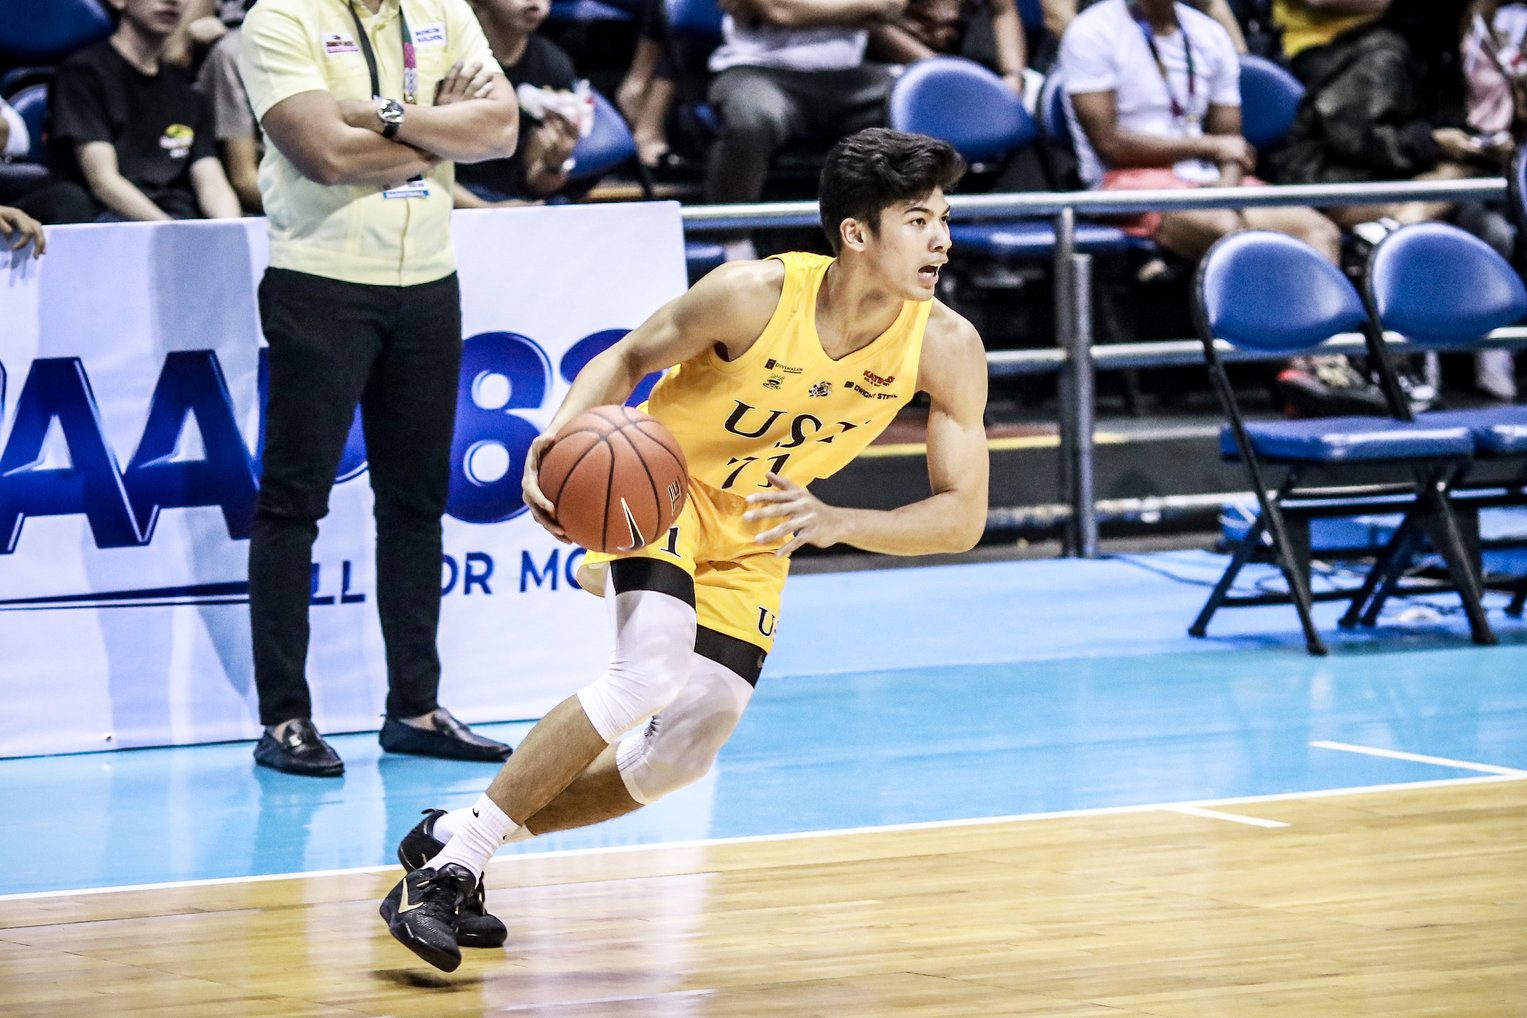 Cansino breaks silence on UST departure, says he got ‘kicked off’